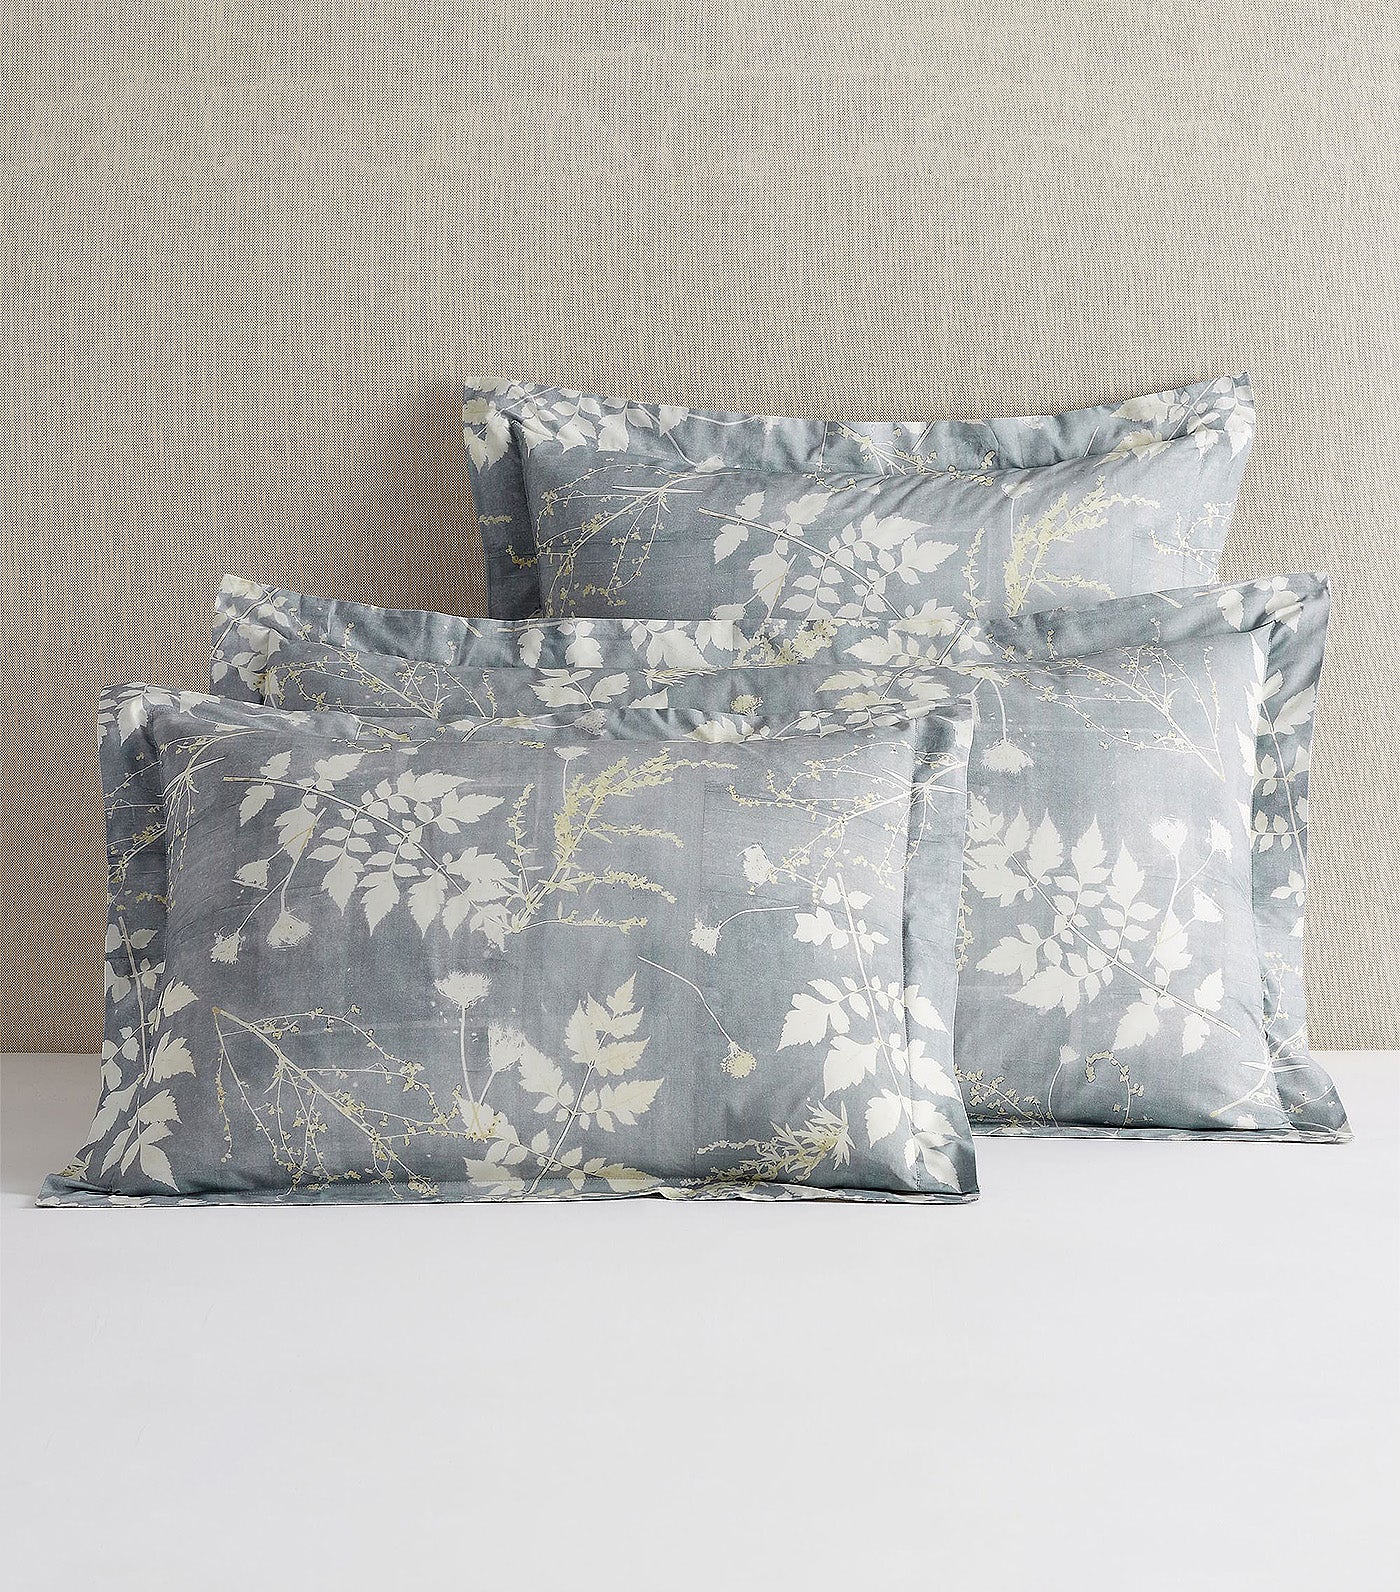 Pottery Barn Shadow Floral Duvet Covers and Shams